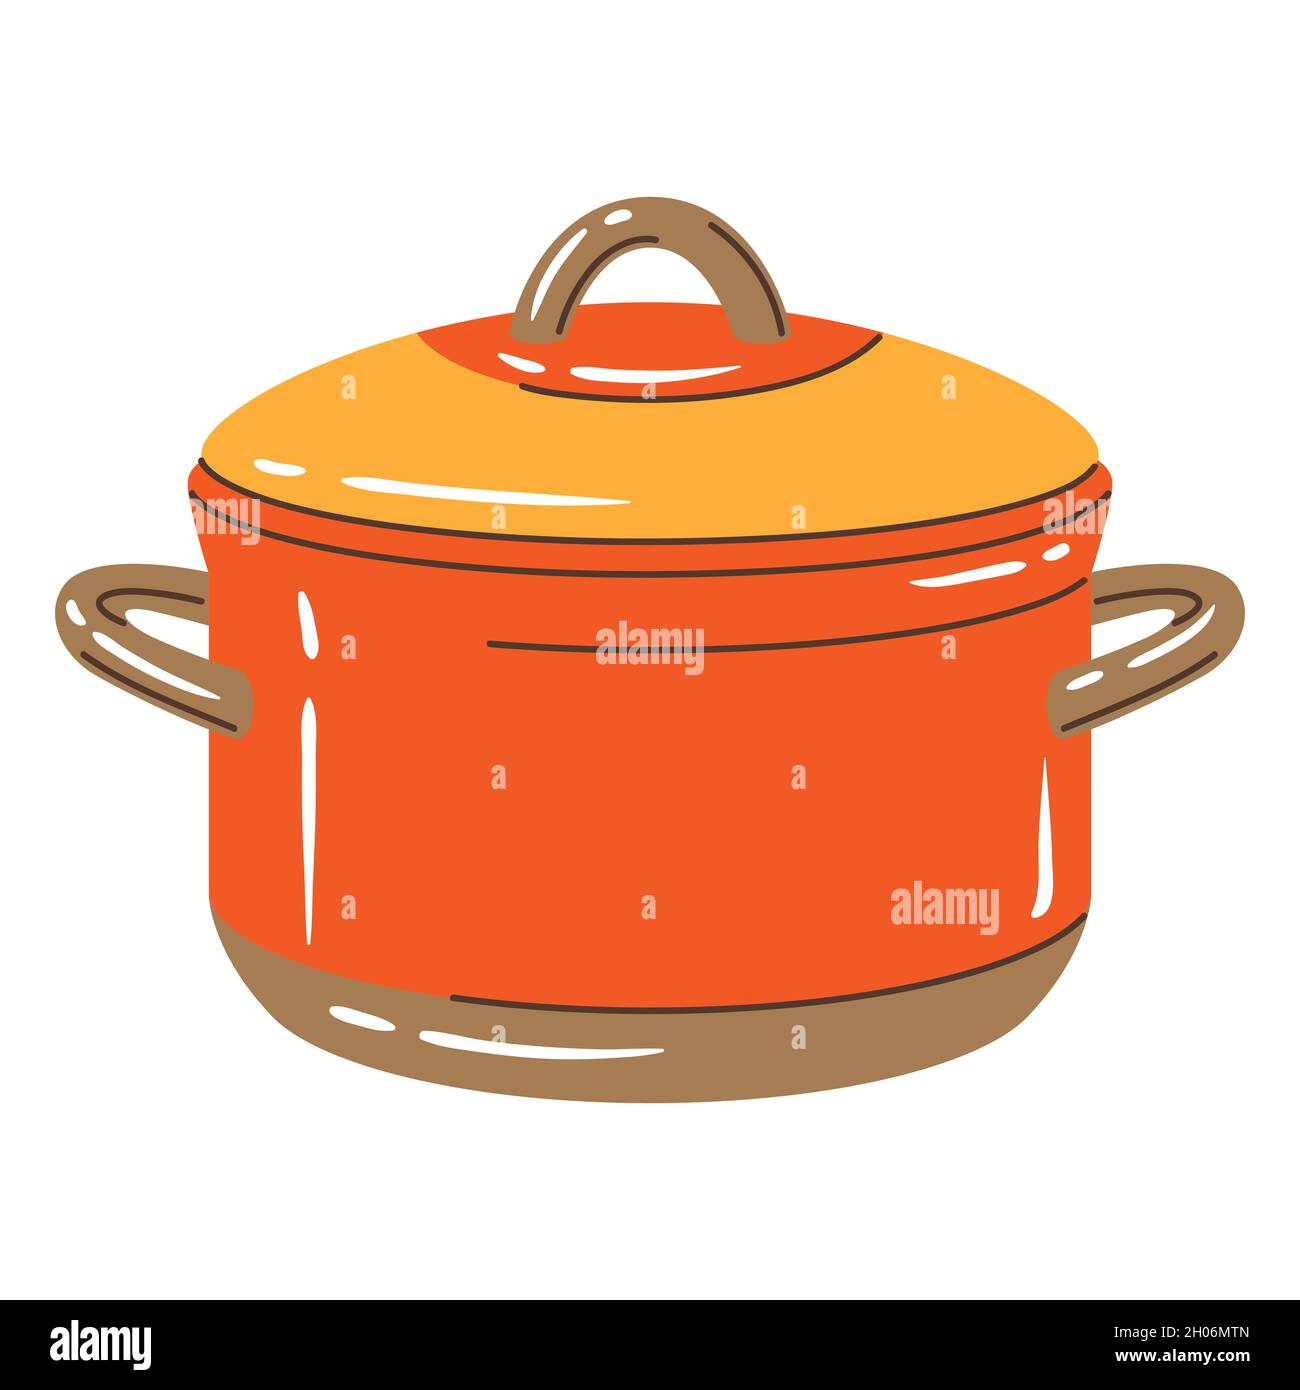 Illustration of cooking pan. Stylized kitchen and restaurant utensil ...